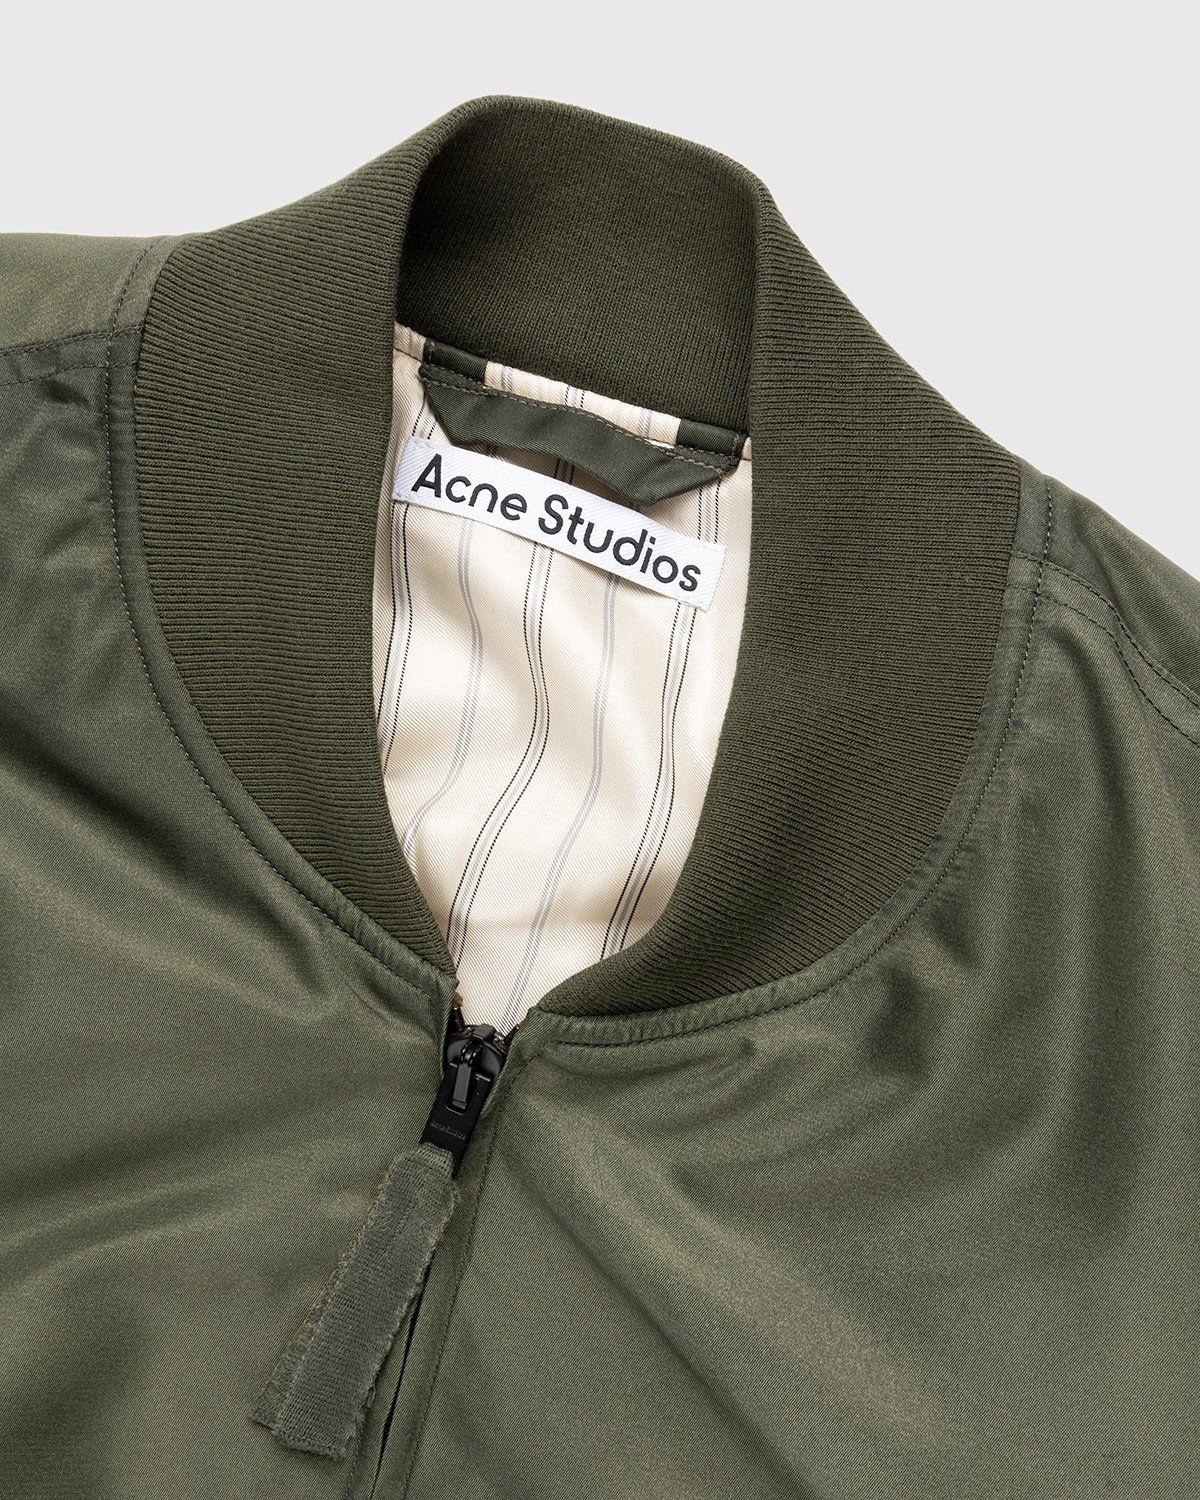 Acne Studios – Satin Bomber Jacket Olive Green - Outerwear - Green - Image 3